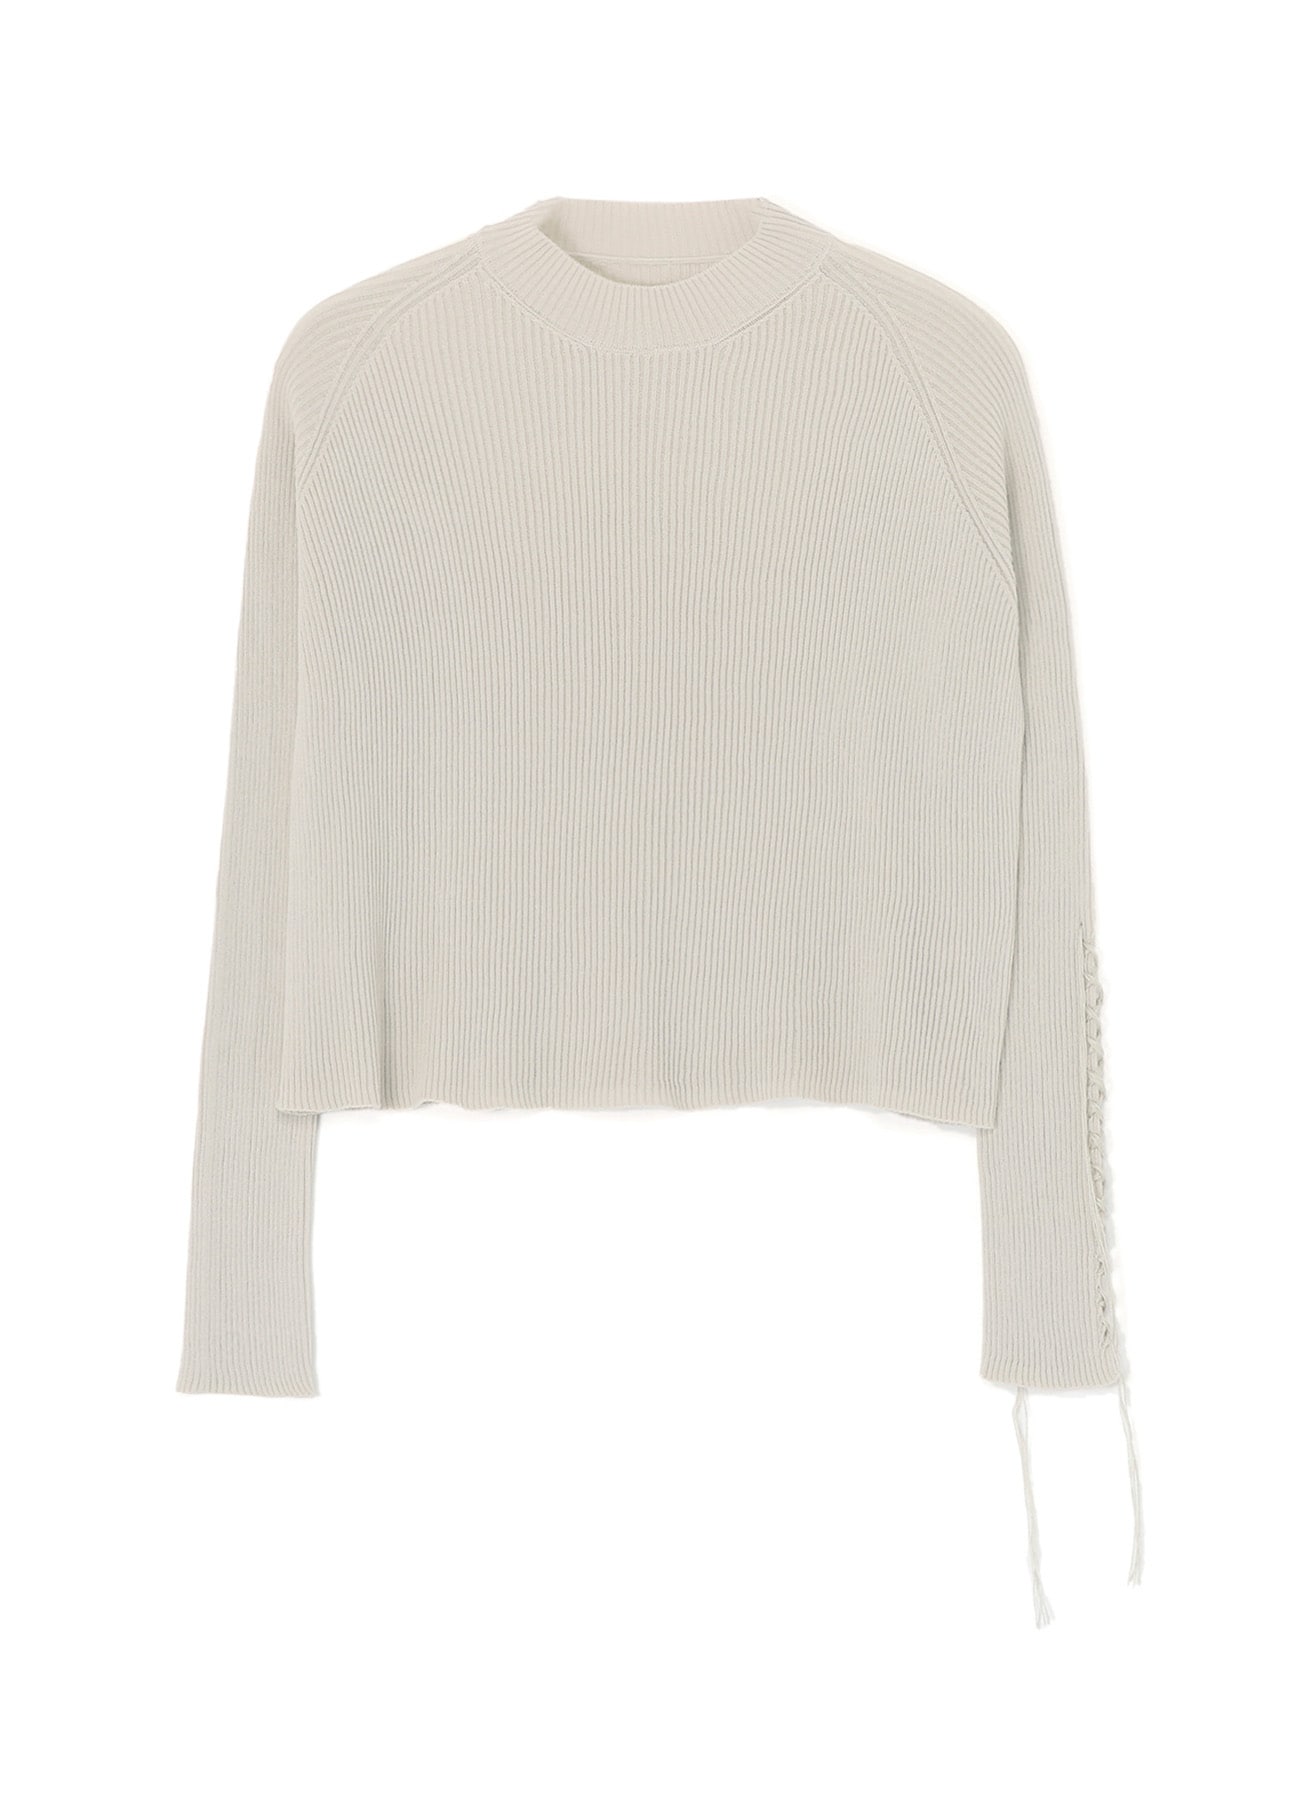 LACED UP LONG SLEEVE ROUND MOCKNECK RIBBED KNIT(S Grey): Y's｜THE 